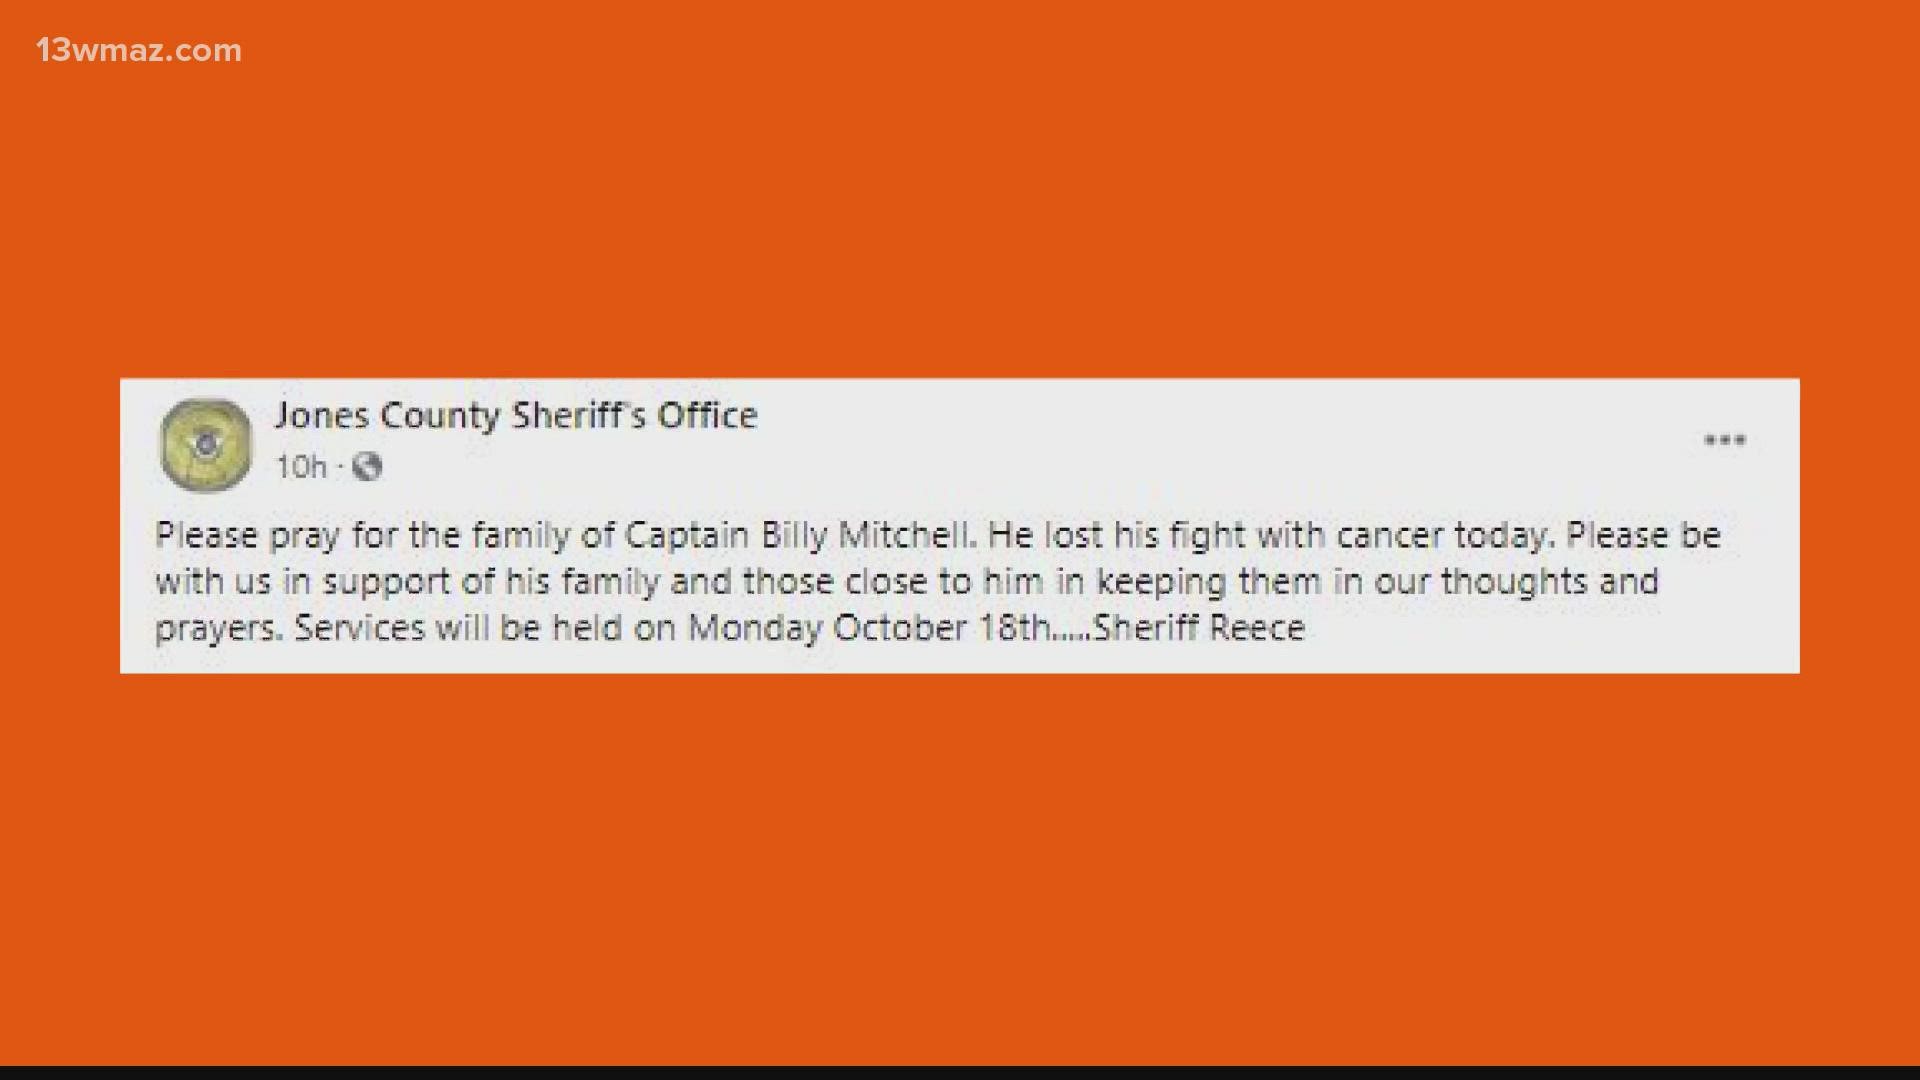 According to a post from the sheriff's office, Captain Billy Mitchell passed away after a battle with cancer.